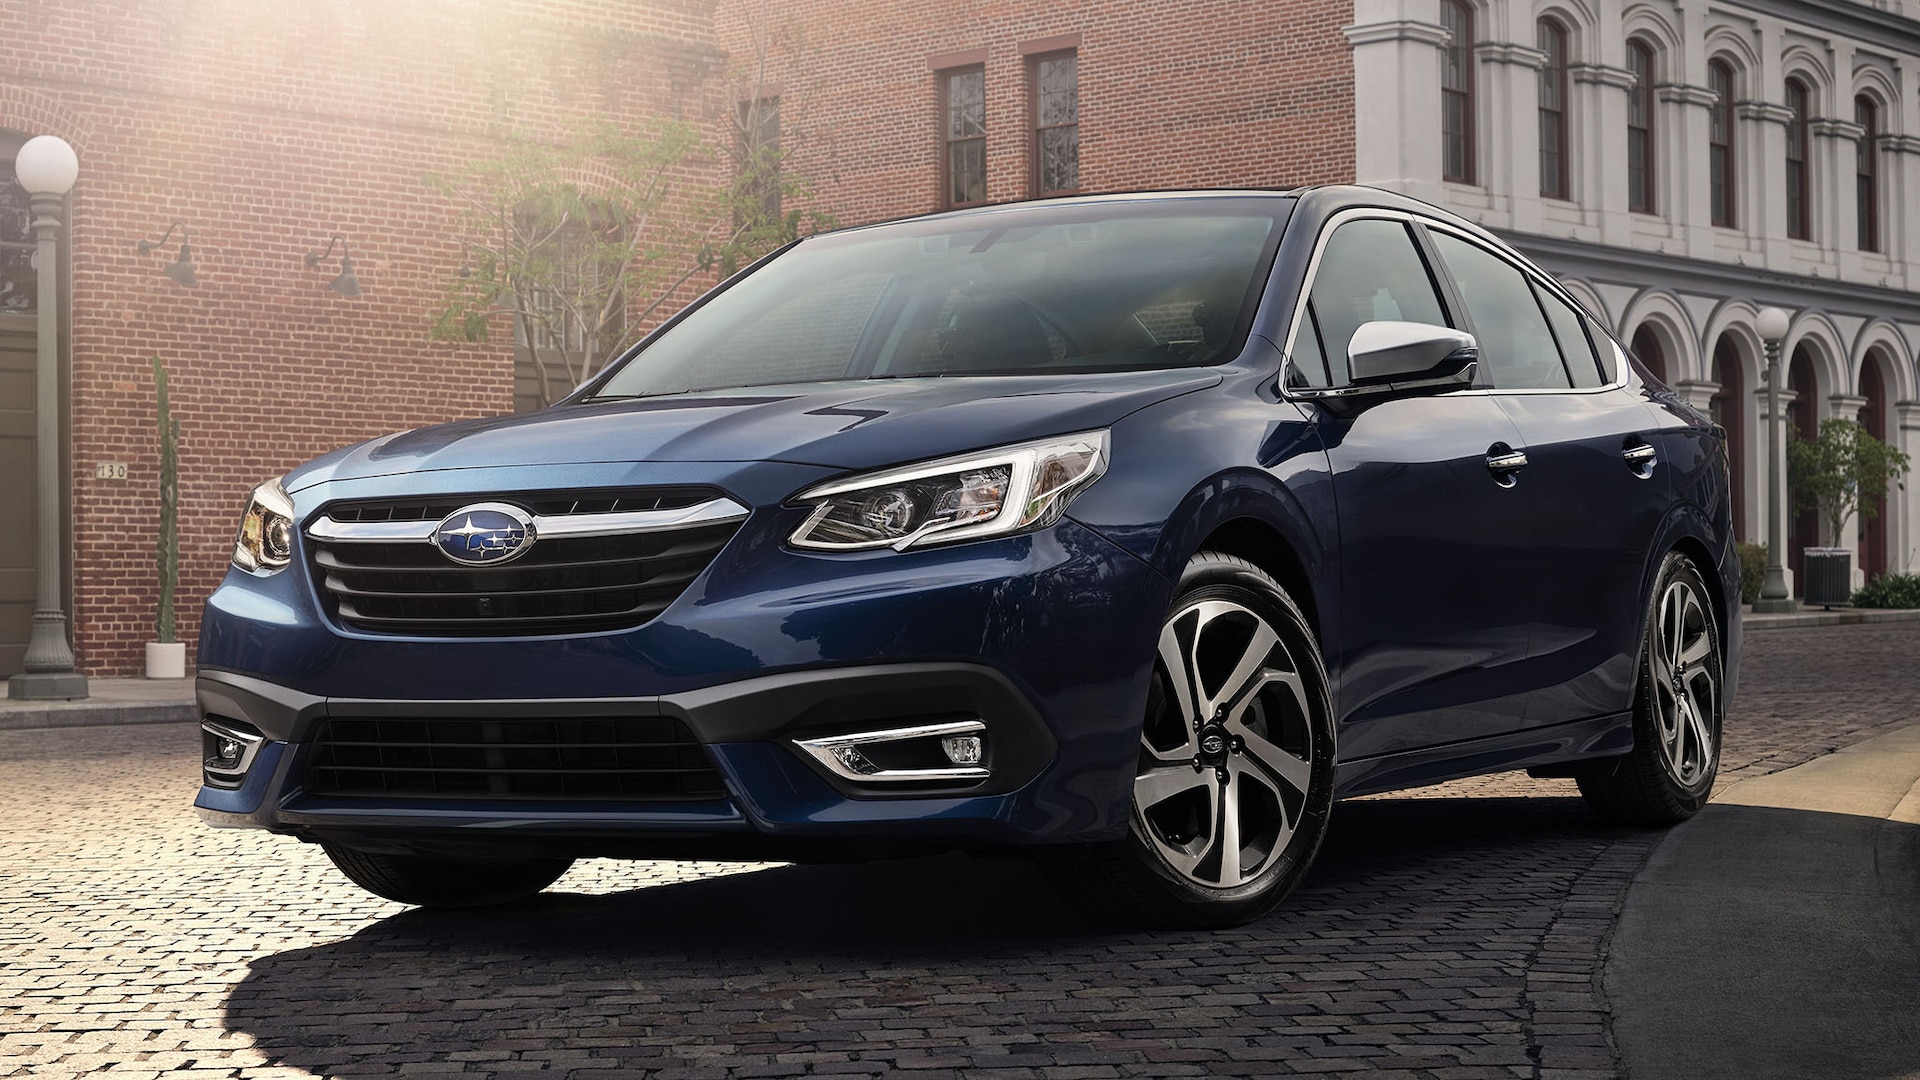 2022 Subaru Legacy Prices, Reviews, and Photos - MotorTrend